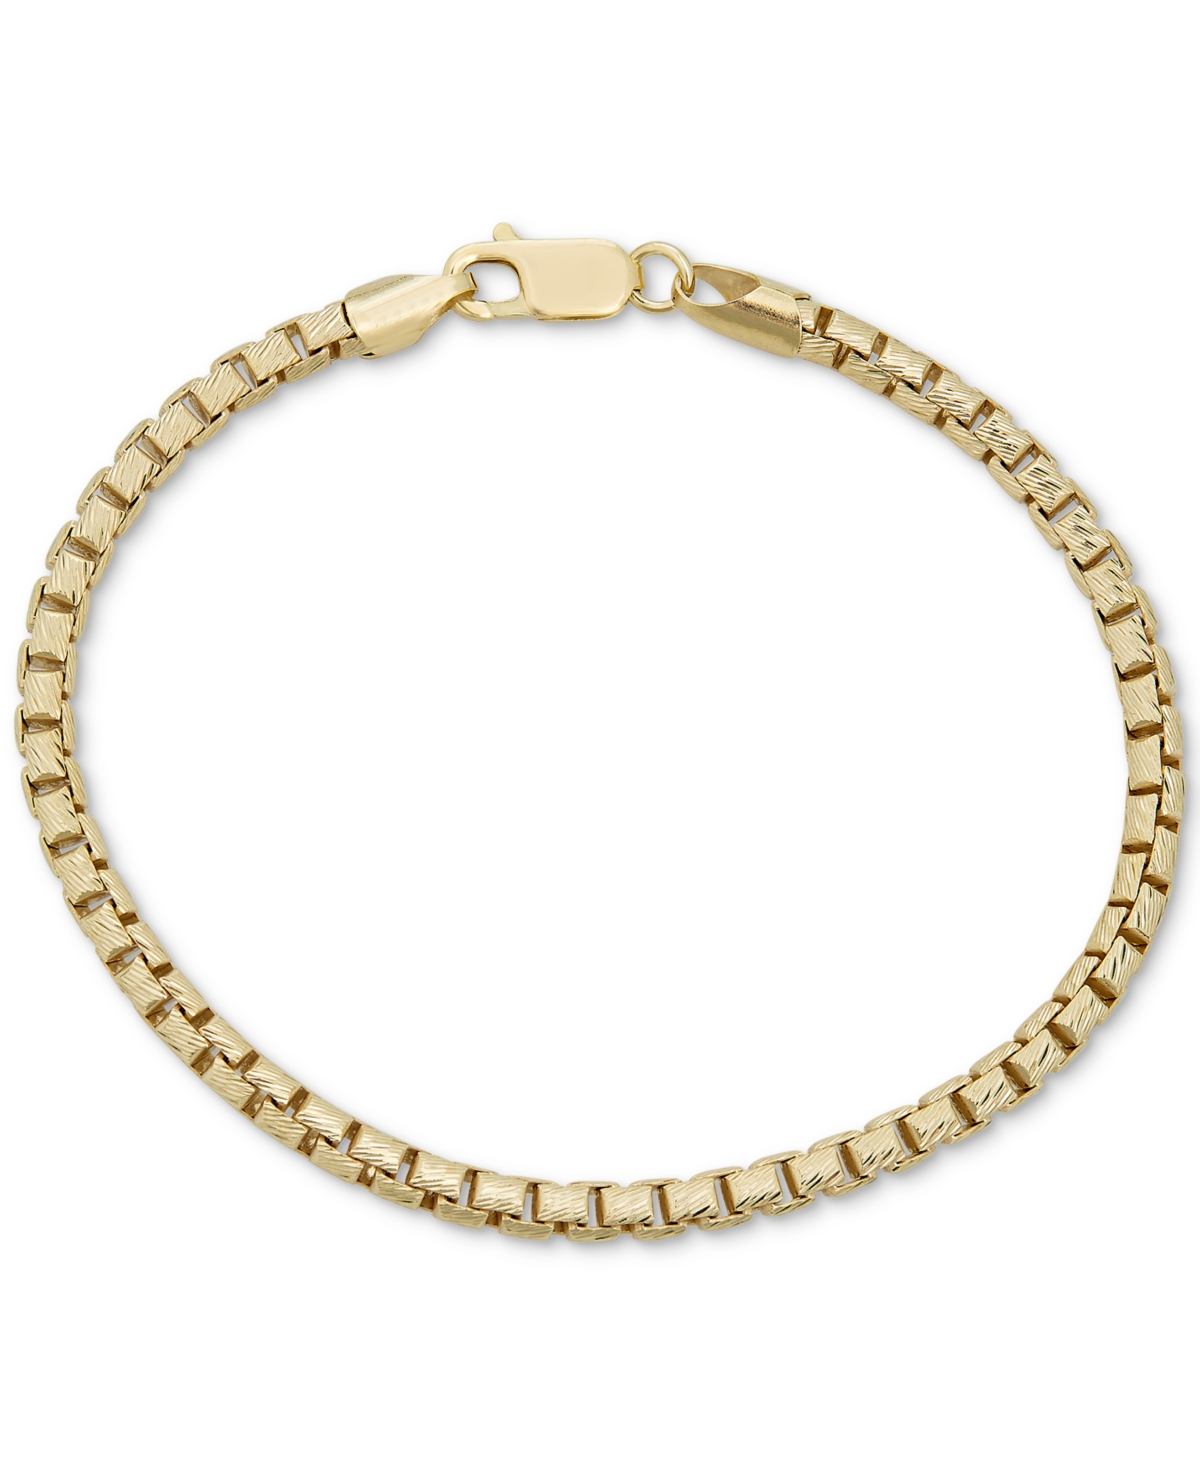 Box Link Chain Bracelet in 14k Gold-Plated Sterling Silver - Gold Over Silver